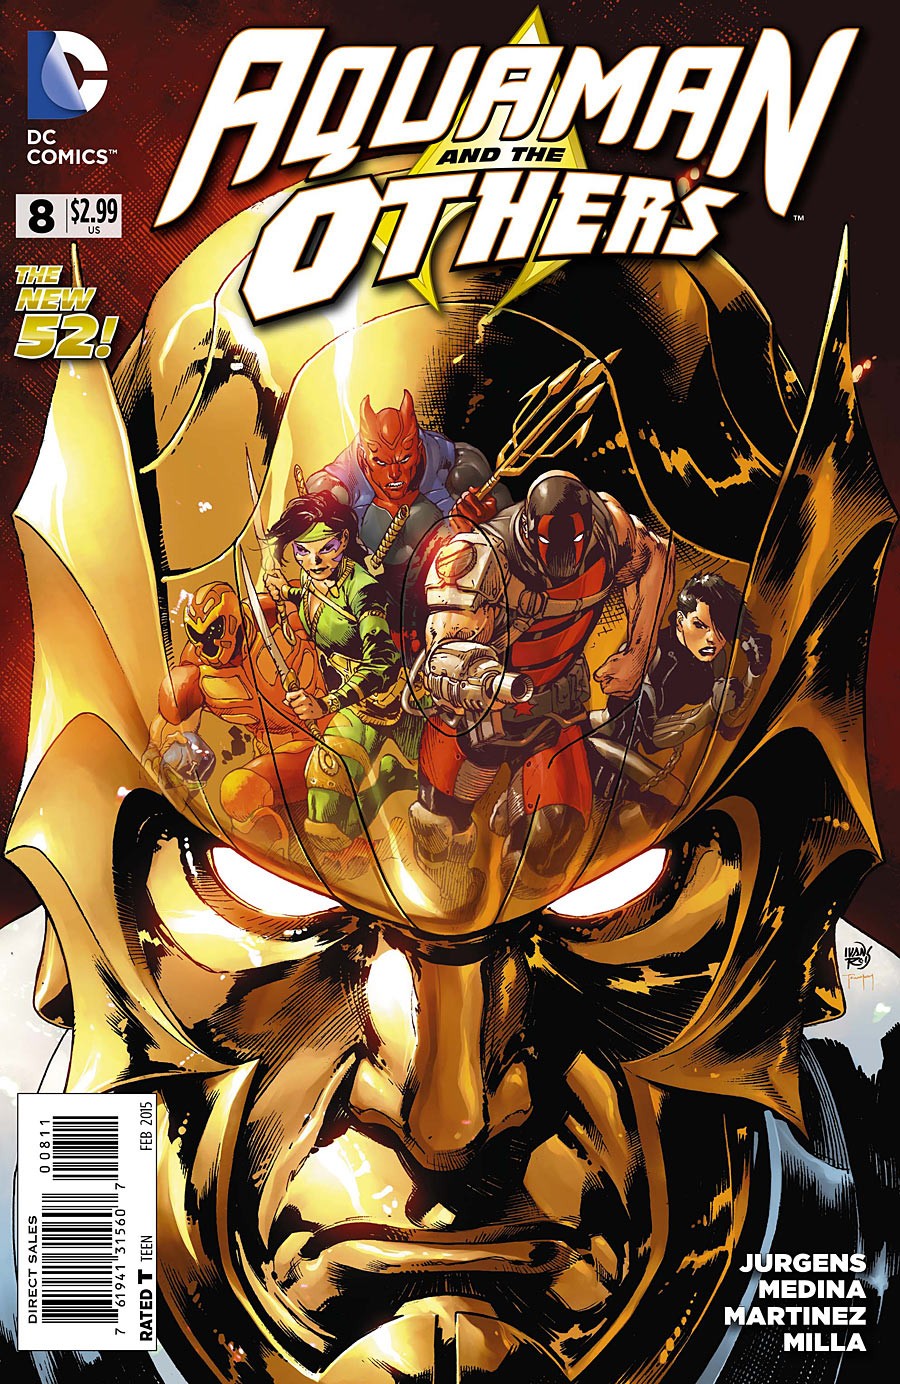 Aquaman and the Others Vol. 1 #8